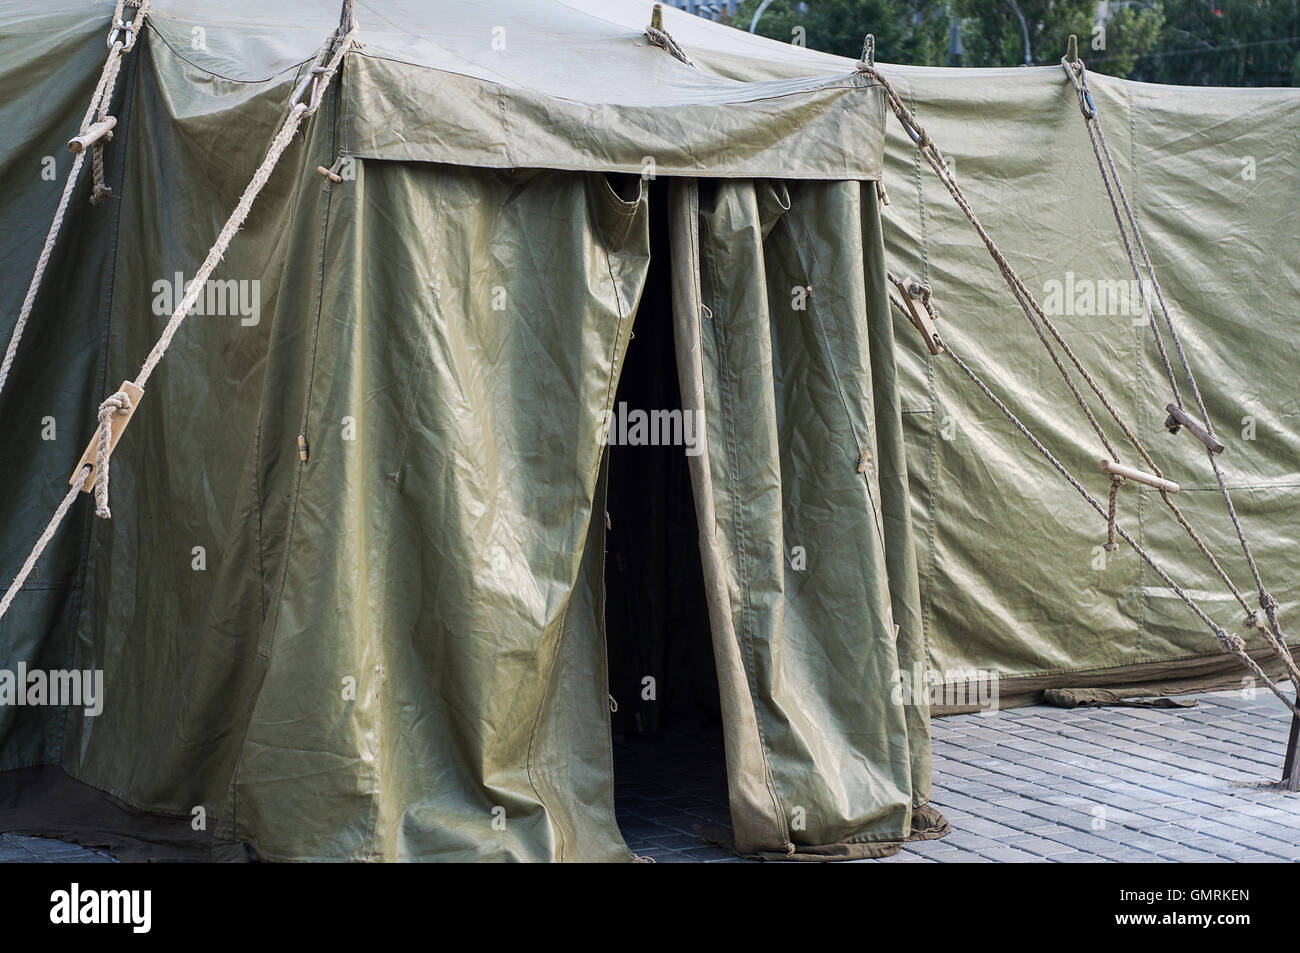 Entrance to the military tent, standing on the pavement Stock Photo